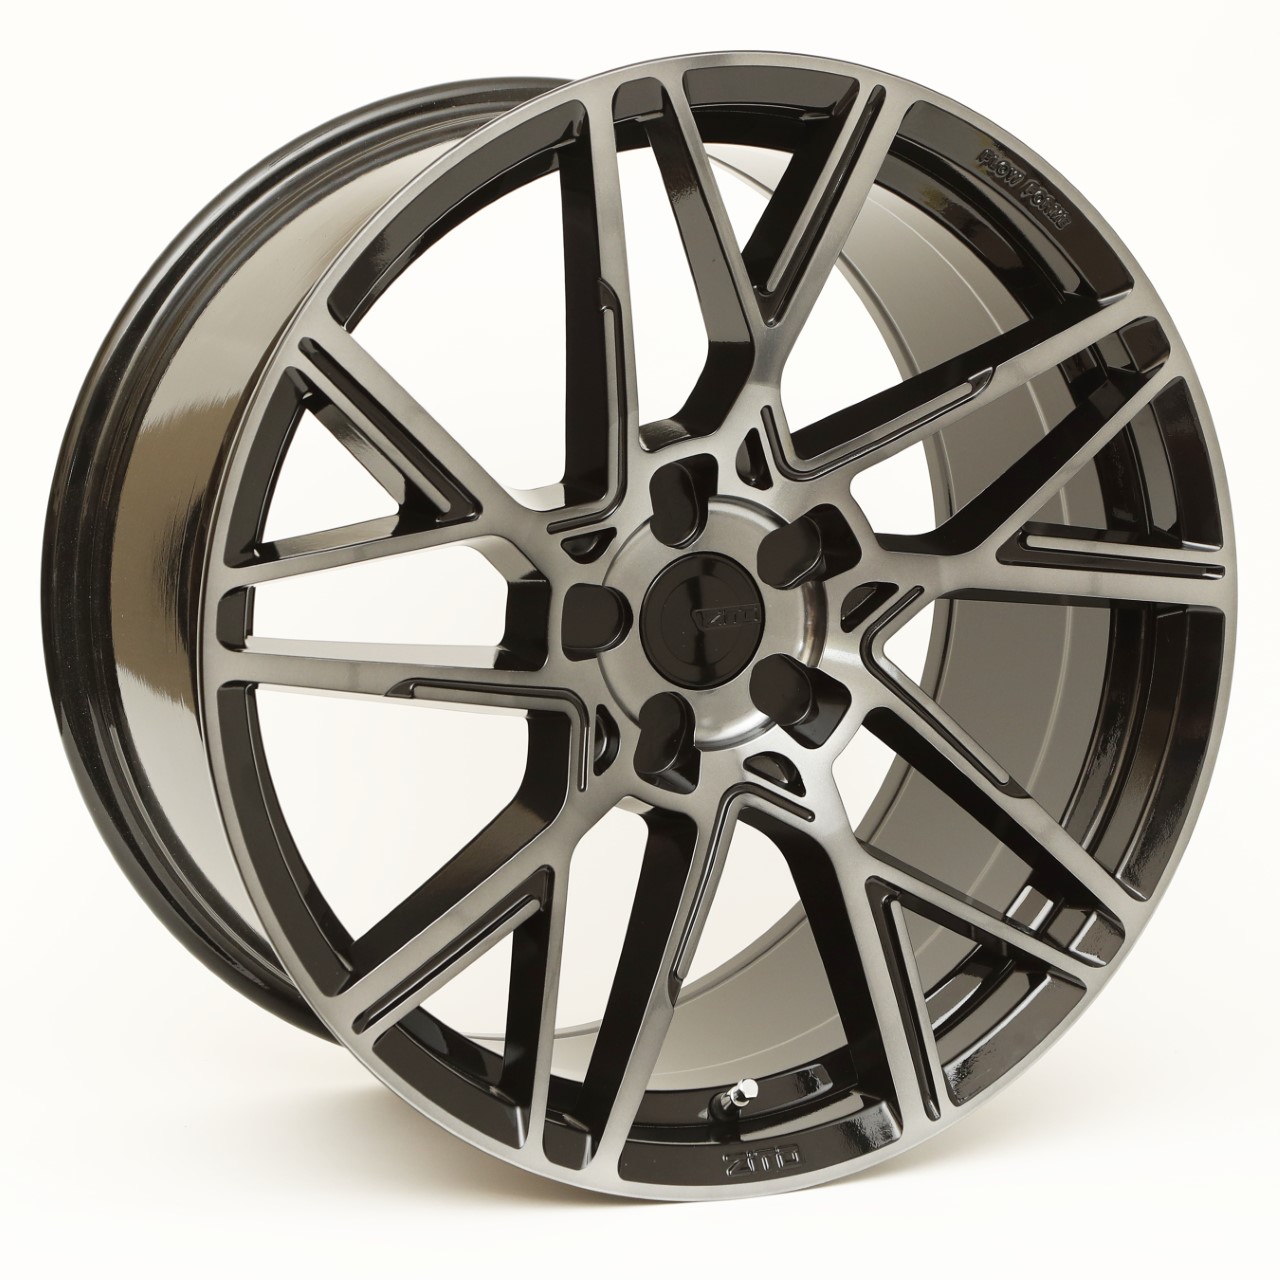 NEW 19  ZITO ZF X FLOW FORMED ALLOY WHEELS IN GLOSS BLACK WITH POLISHED FACE WITH DEEPER CONCAVE 9 5  REAR